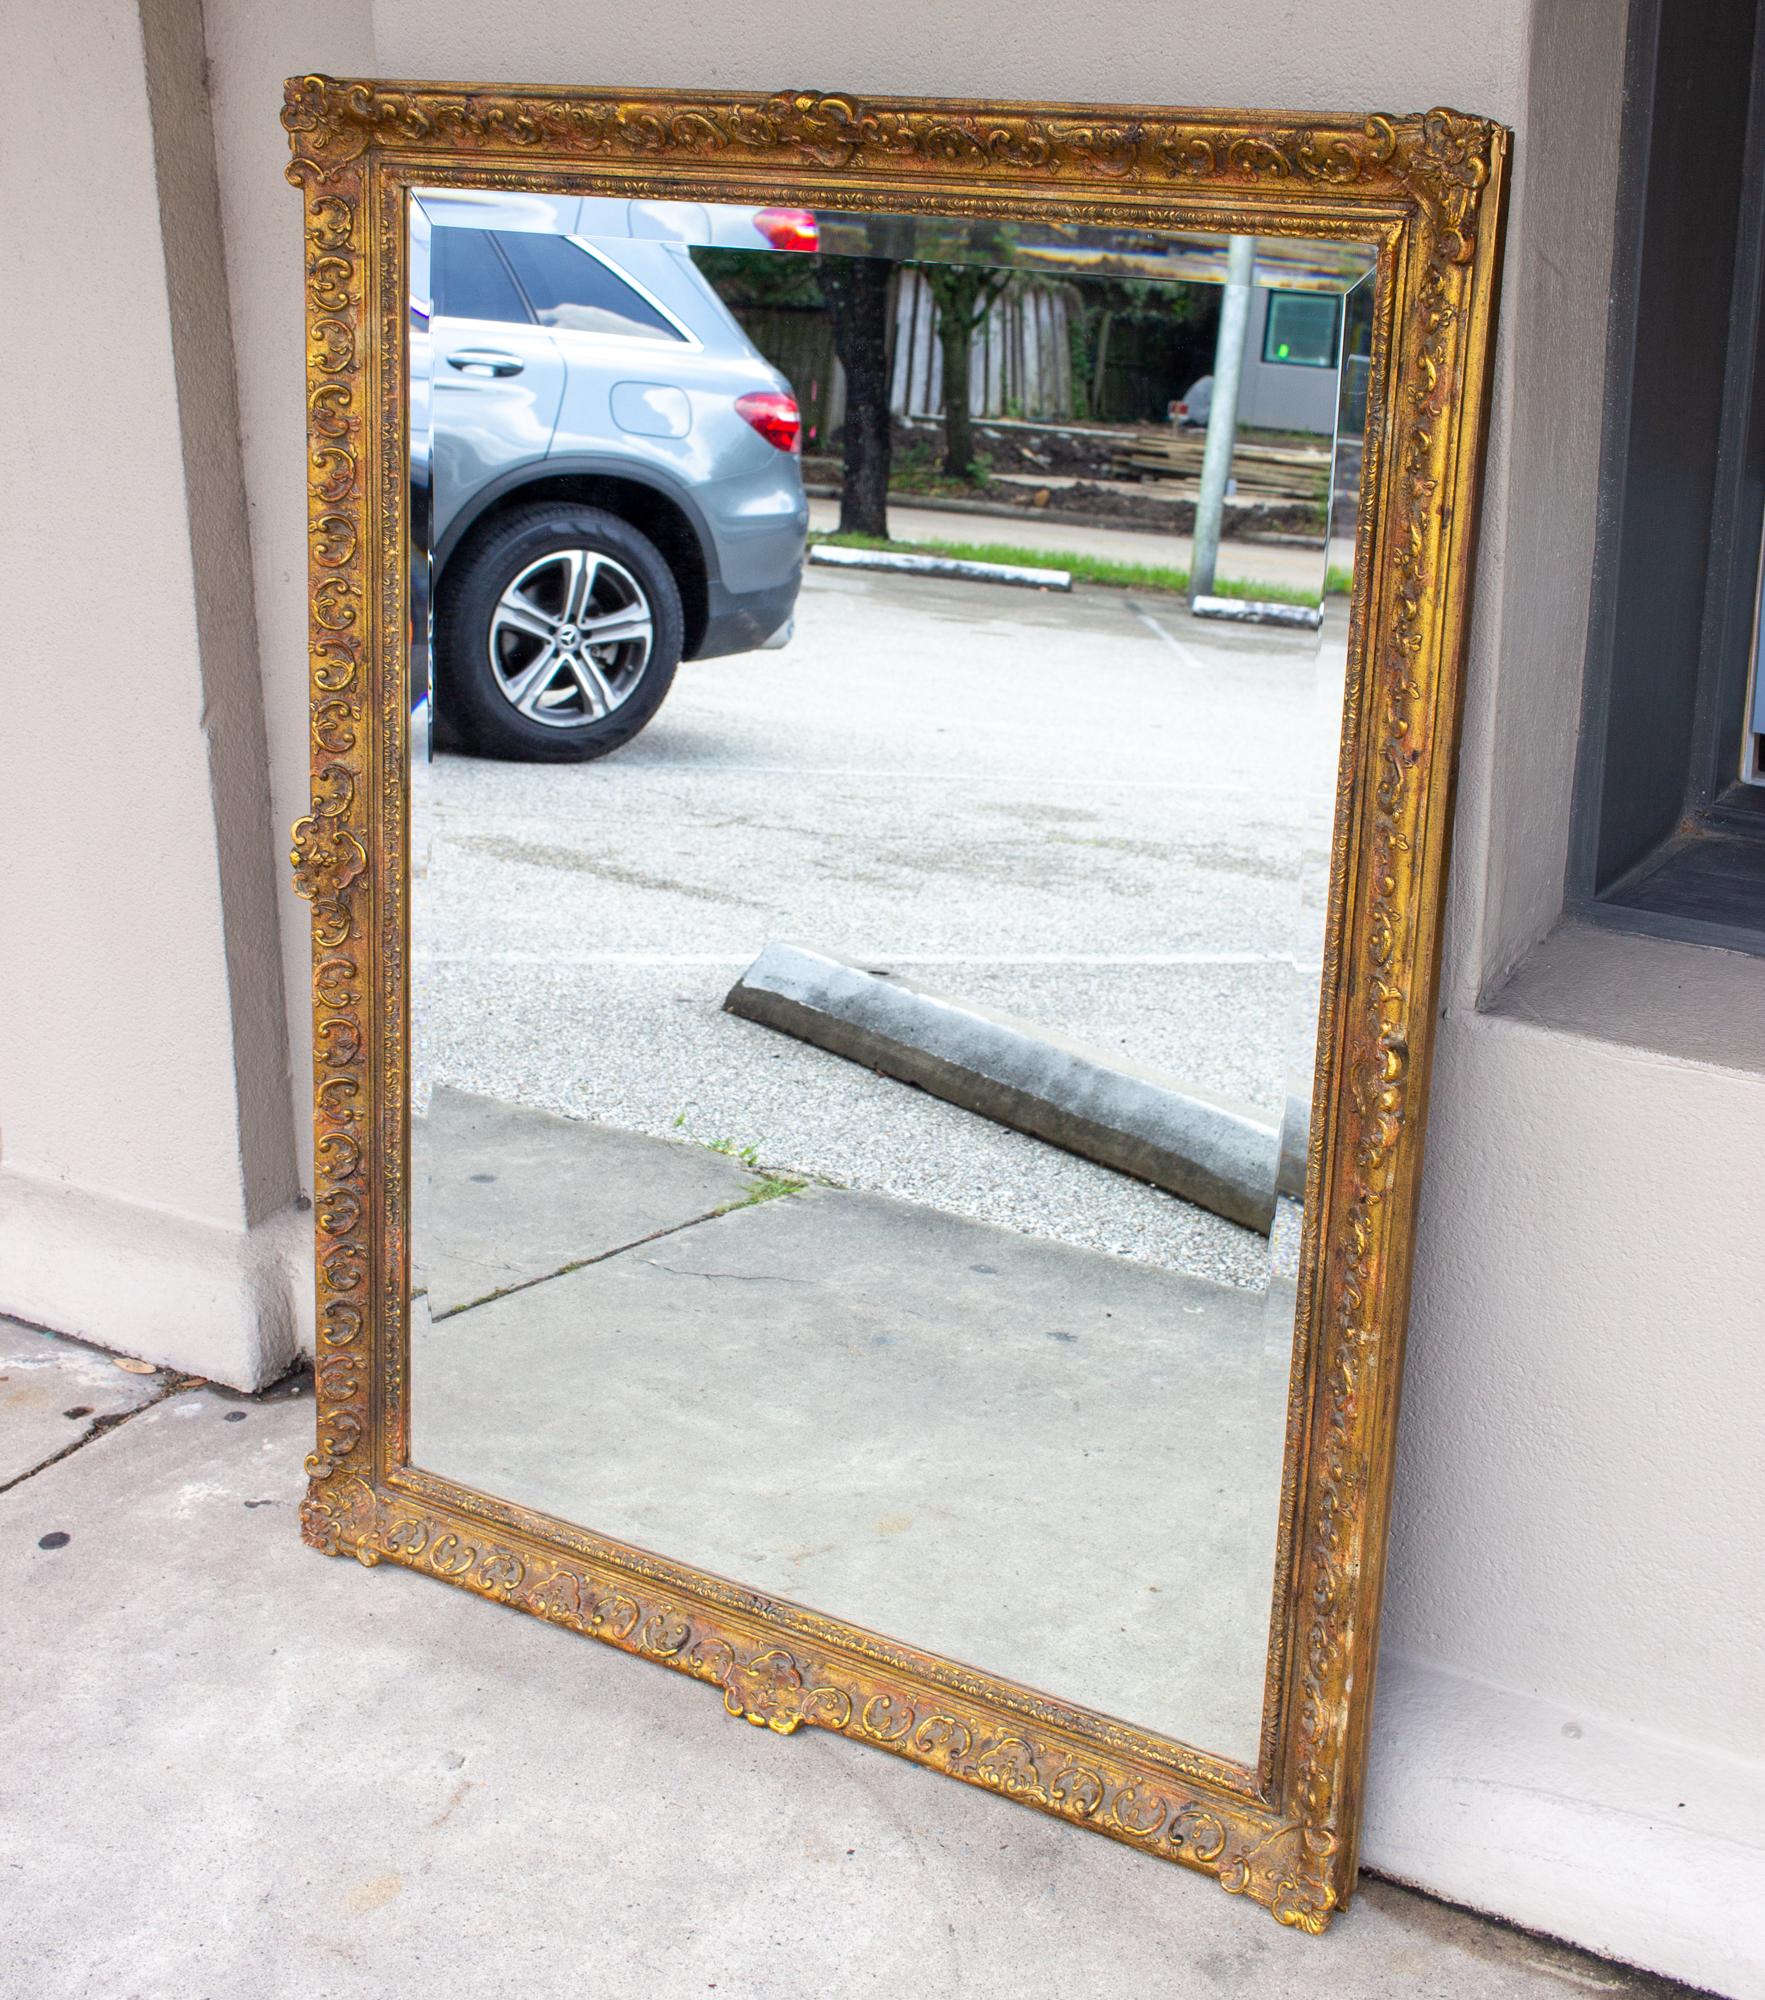 Rococo Revival Antique French Rectangular Floral & Gilt Frame Mirror with Beveled Glass Detail